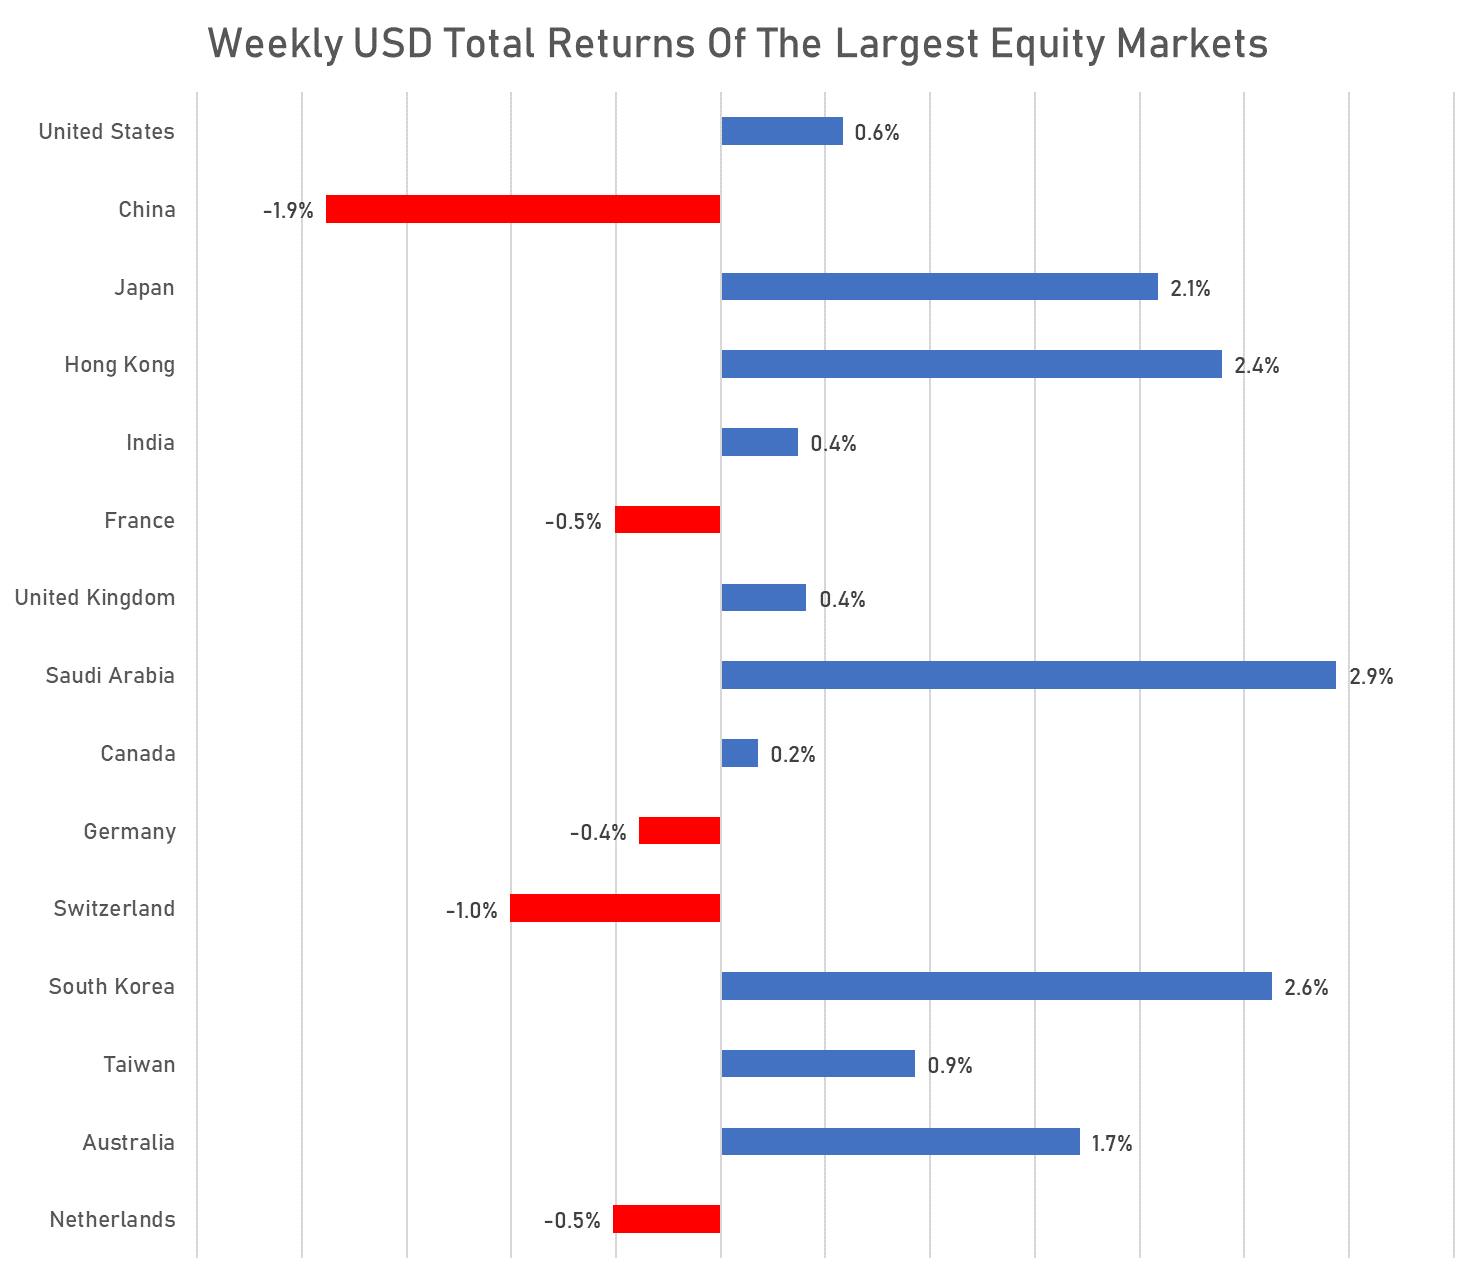 weekly USD total returns of the largest equity markets | Sources: phipost.com, FactSet data